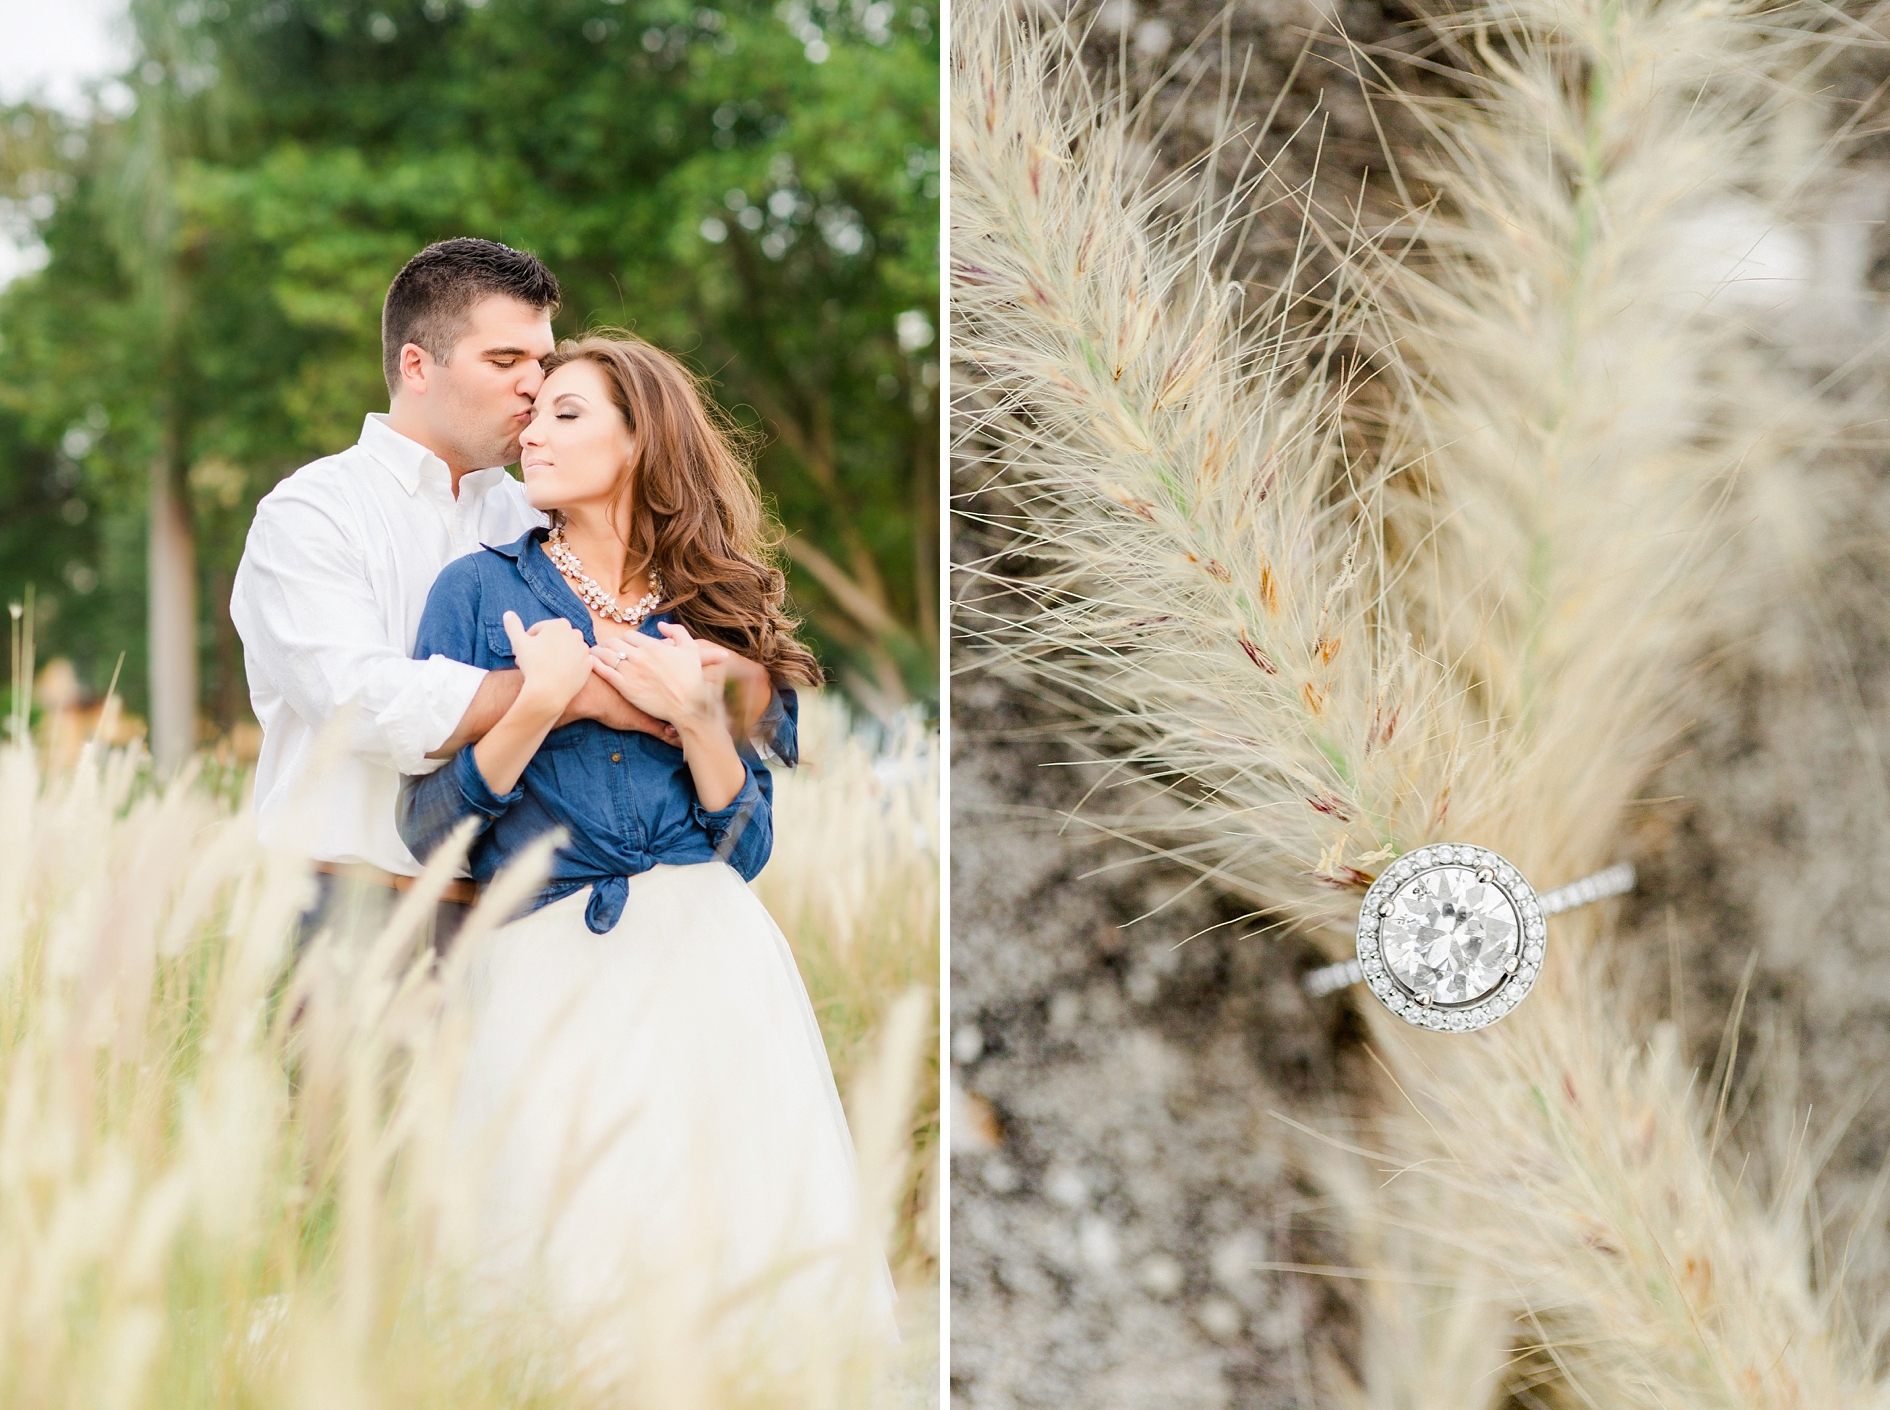 Tampa Engagement | © Ailyn La Torre Photography 2015